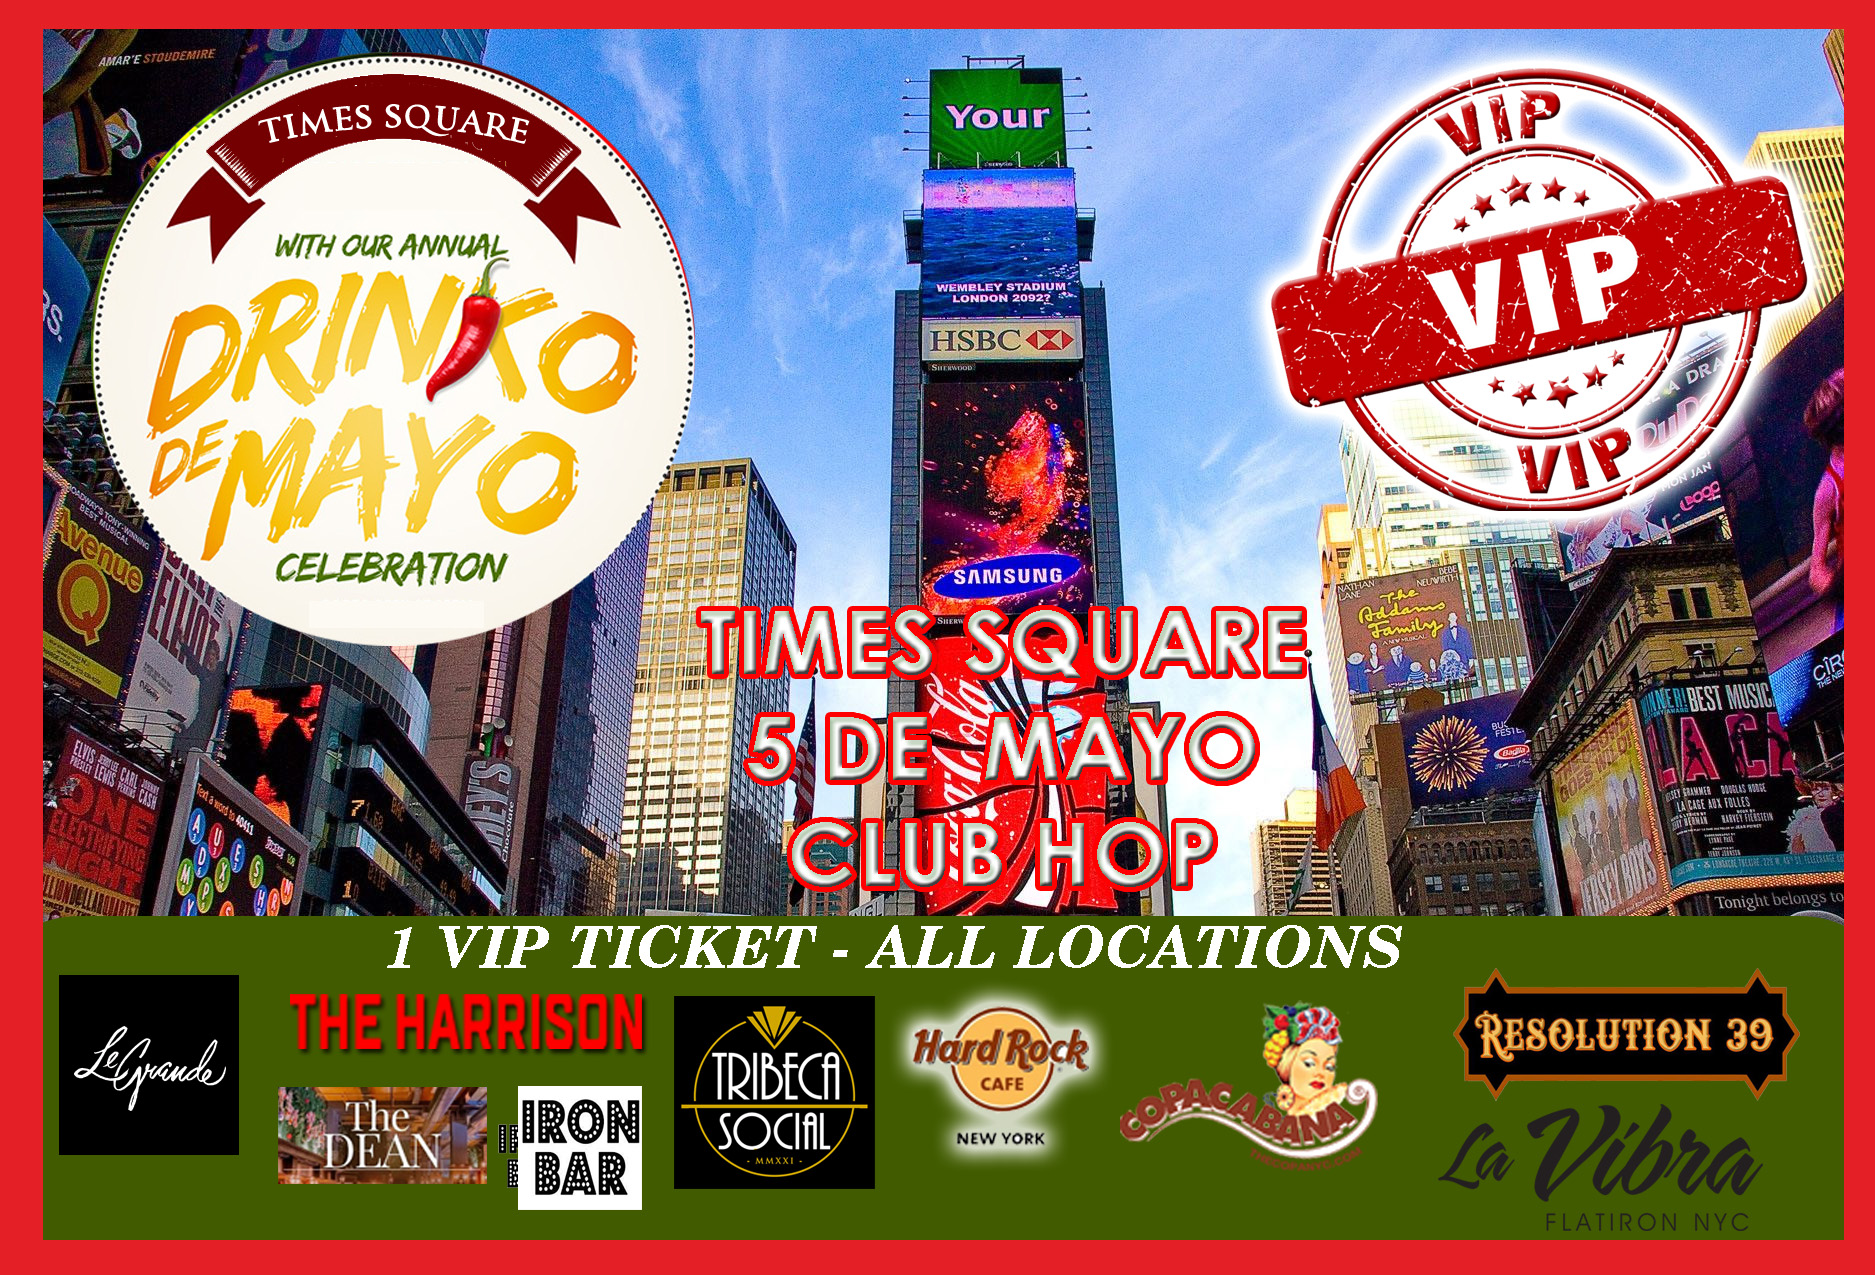 5 DE MAYO CLUB HOP hosted by TSQ EVENTS